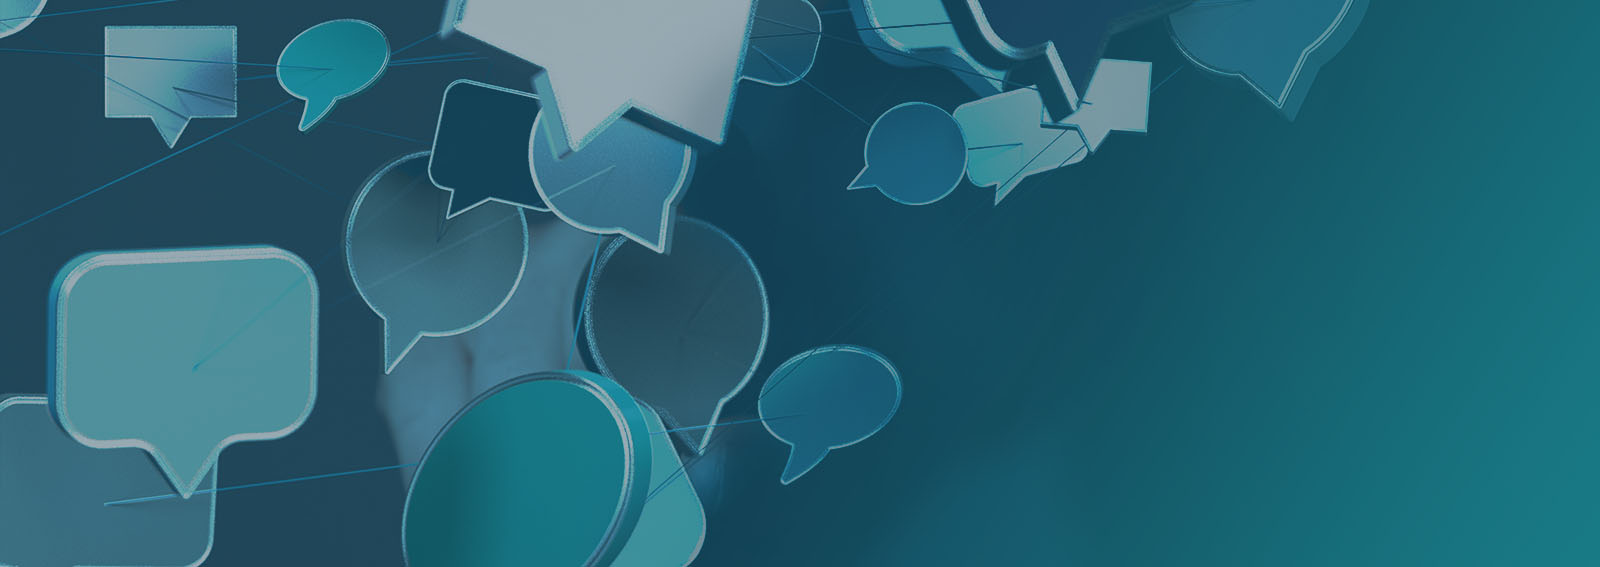 Abstract Speech bubbles on a blue background